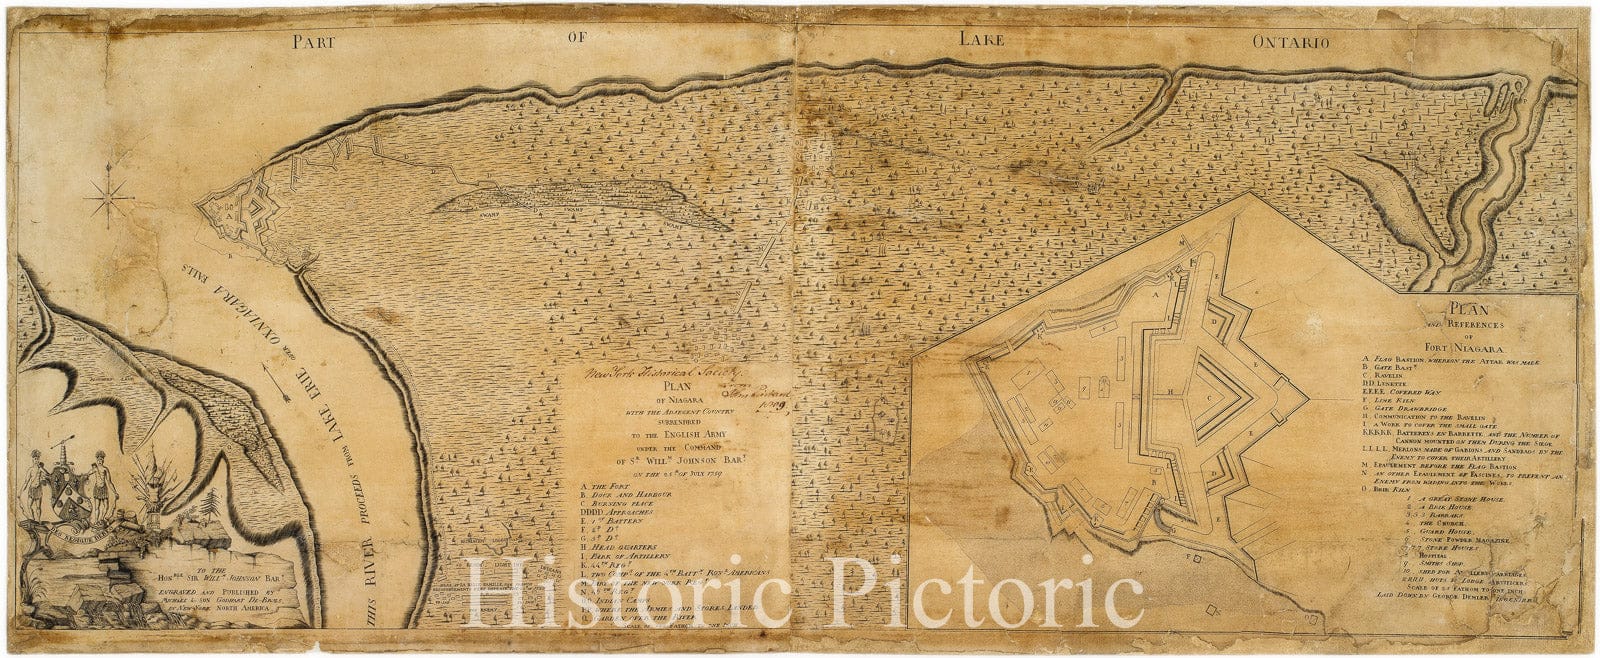 Historical Map, Plan of Niagara with The Adjacent Country surrendered to The English Army Under The Command of Sr. Willm: Johnson Bart: on The 25th of July 1759, Vintage Wall Art